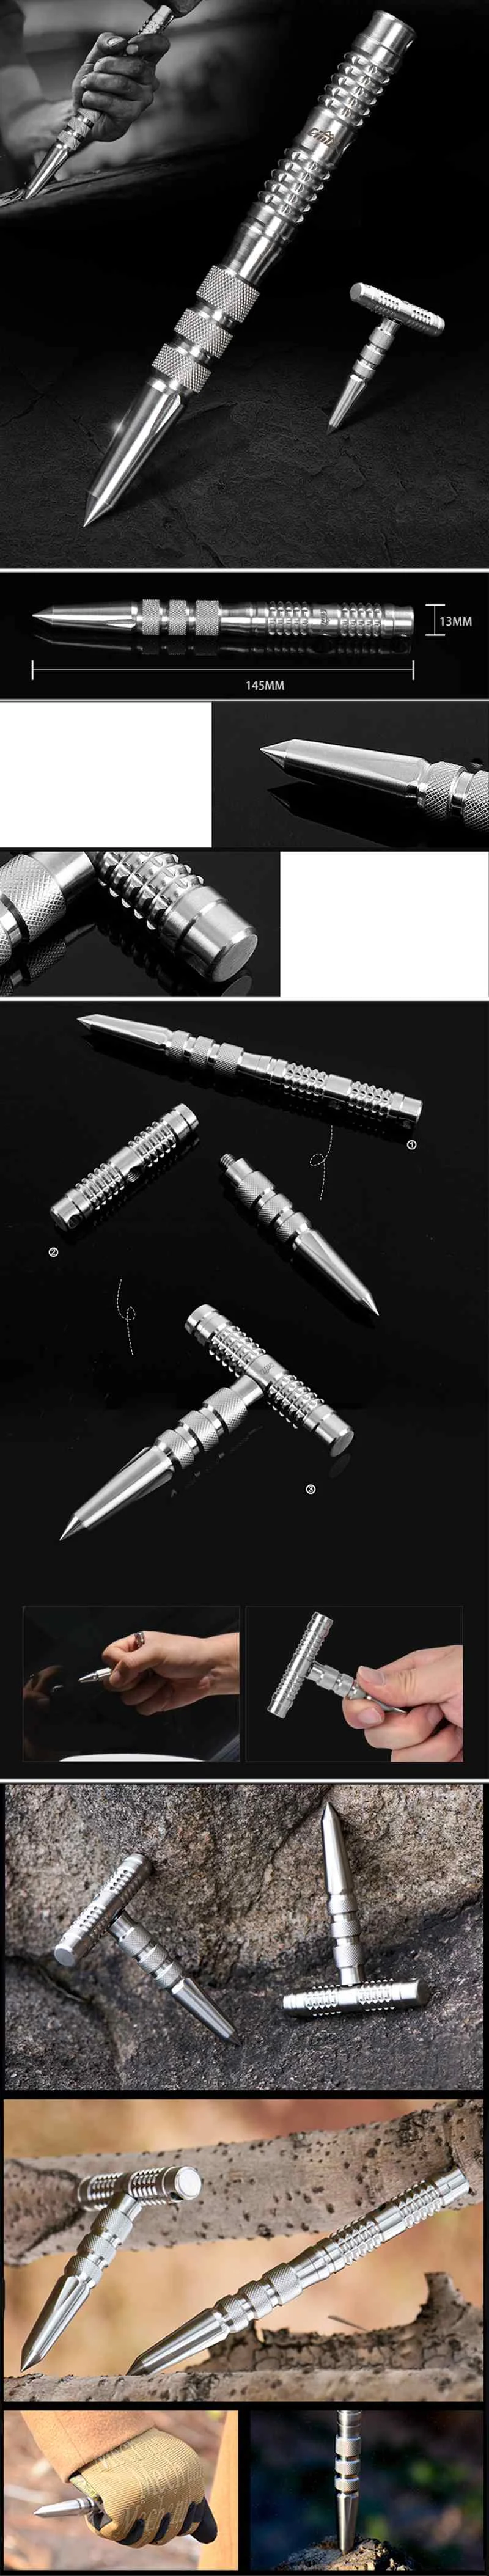 Hot Sale 3 In 1 Emergency Selfdefense Outdoor Tactical EDC Pen Portable Stainless Steel Safety Stick Emergency Survival Tool Kit